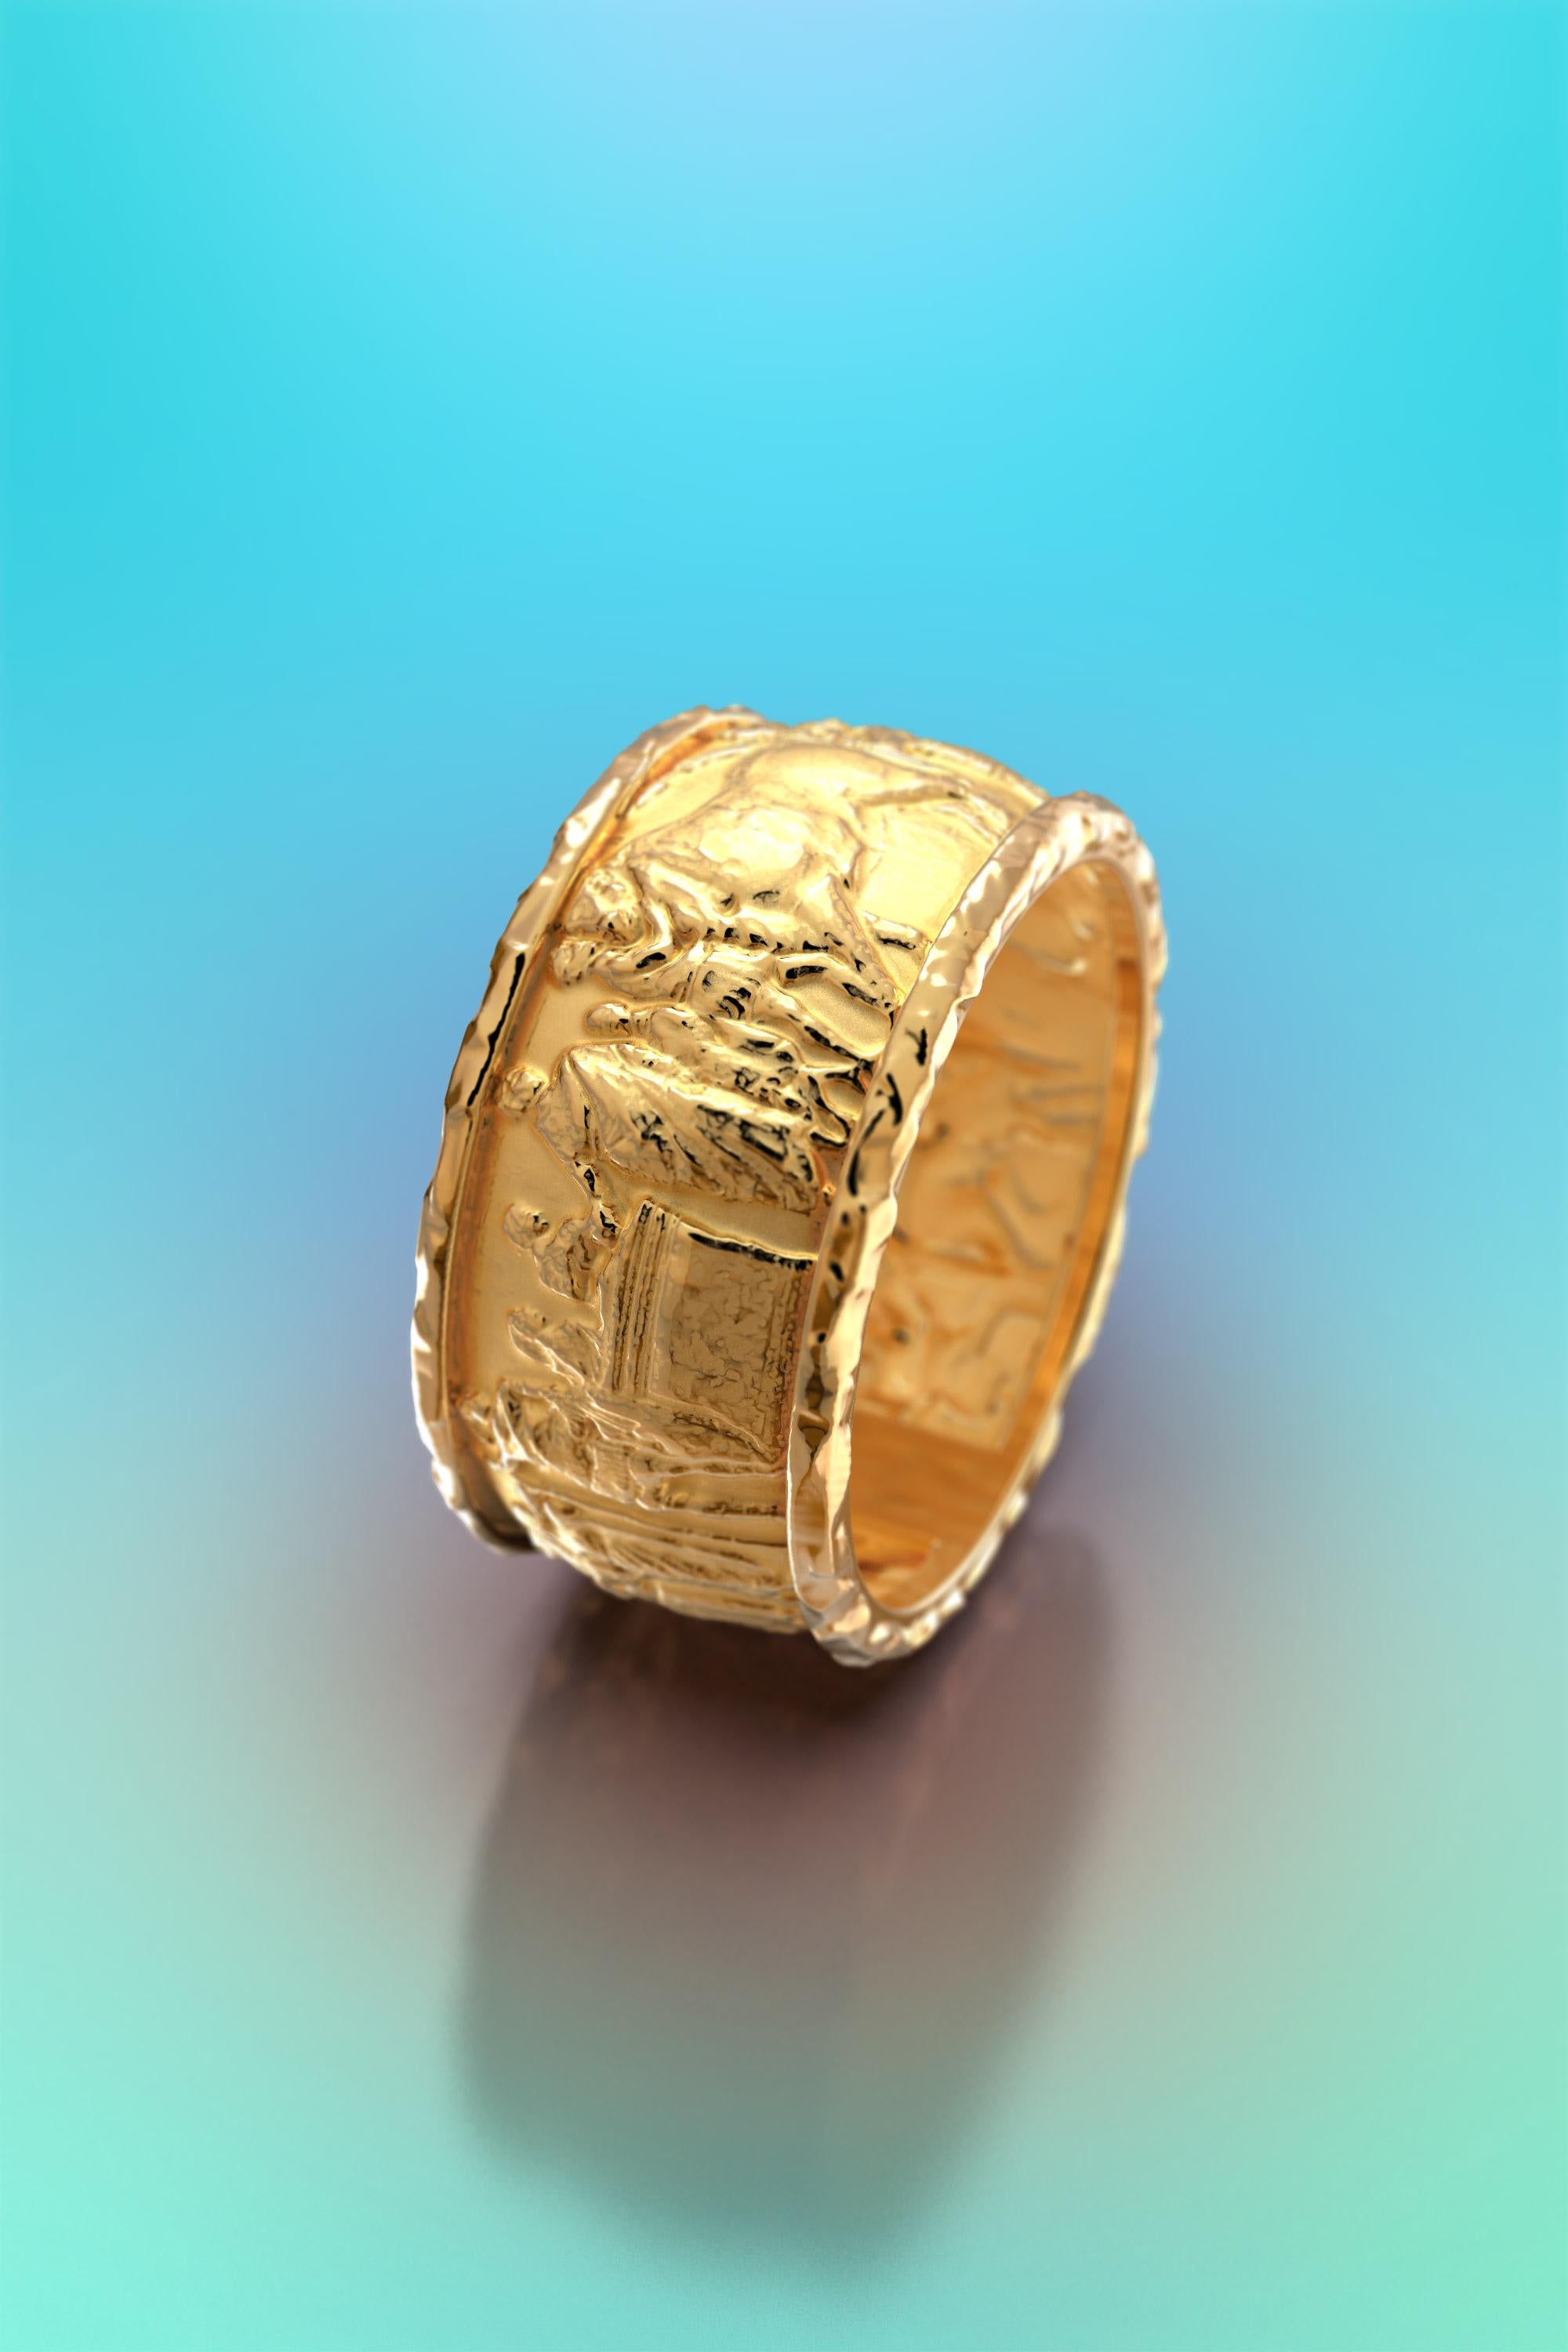 For Sale:  Sculptural Ring, Ancient Style Solid Gold Ring, 14k Gold Ring Made in Italy 8